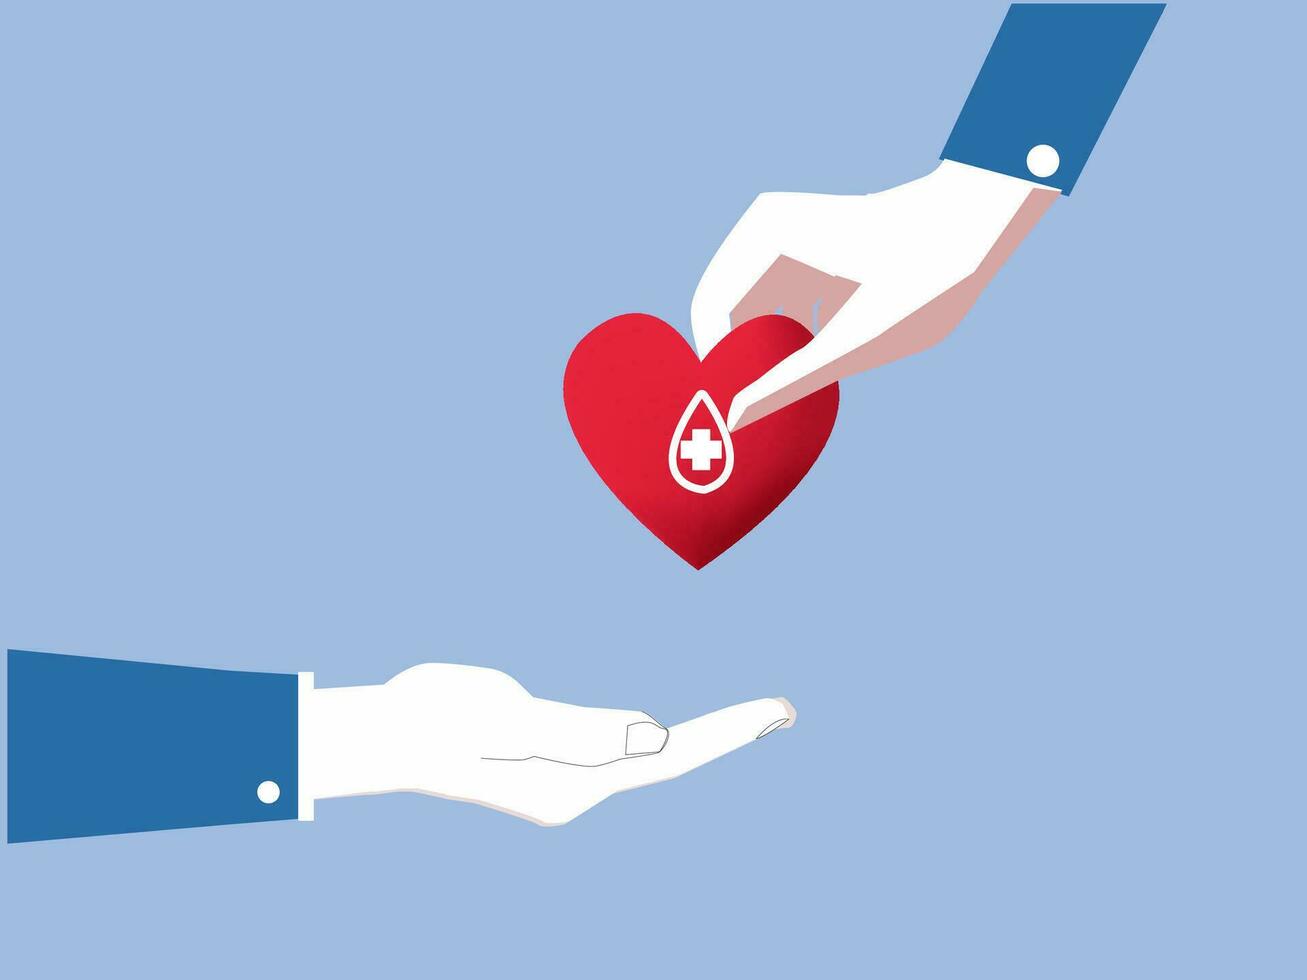 Female hand giving red heart, child's hand for blood donation concept, World Blood Donation Day.Copy space for advertisers. vector illustration.